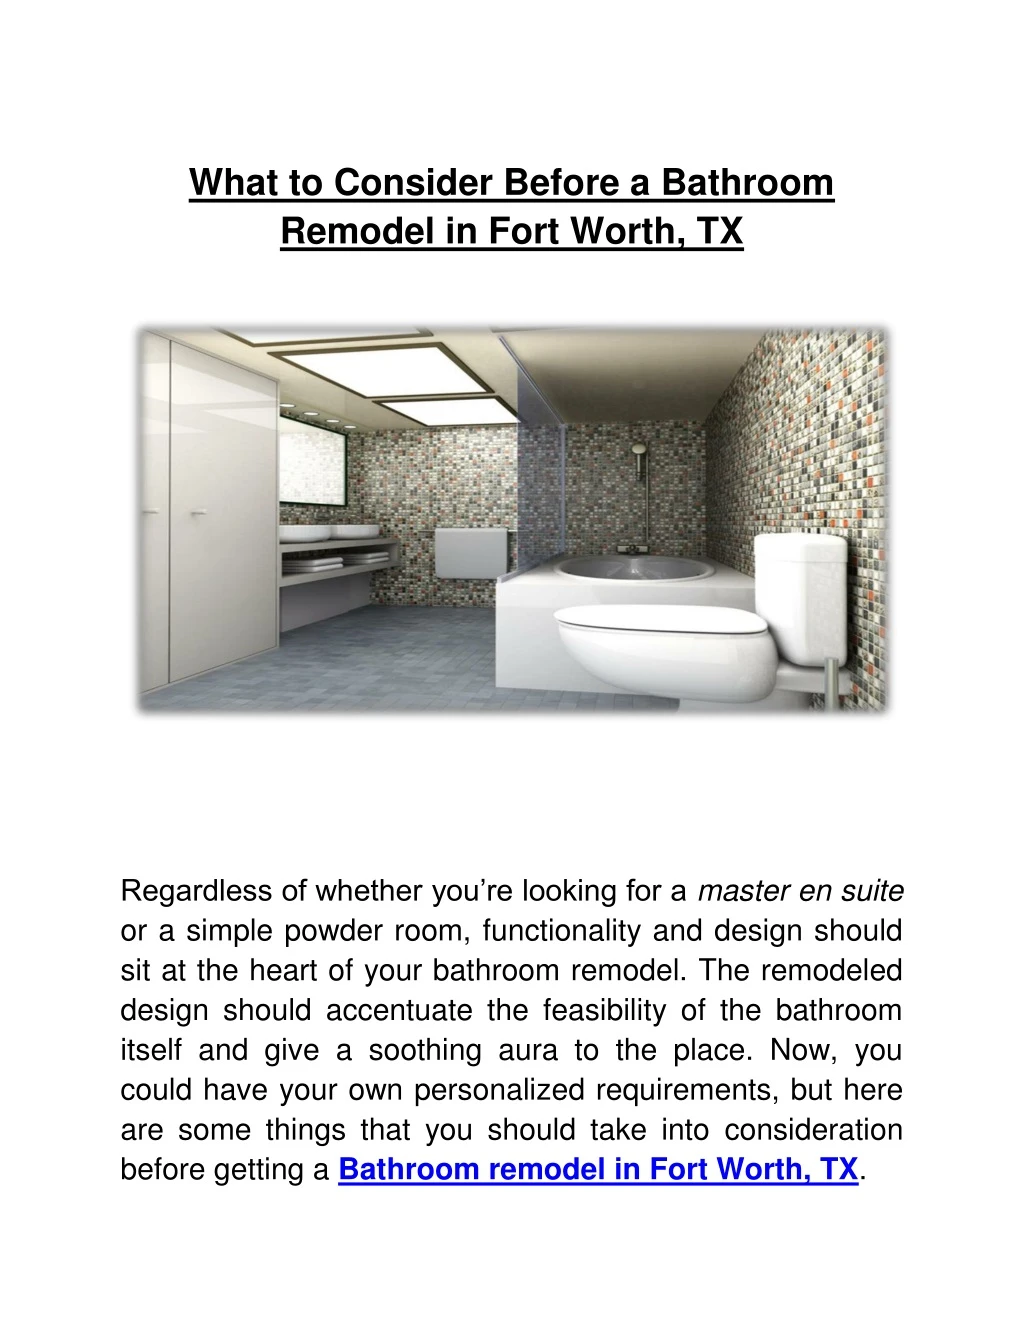 what to consider before a bathroom remodel